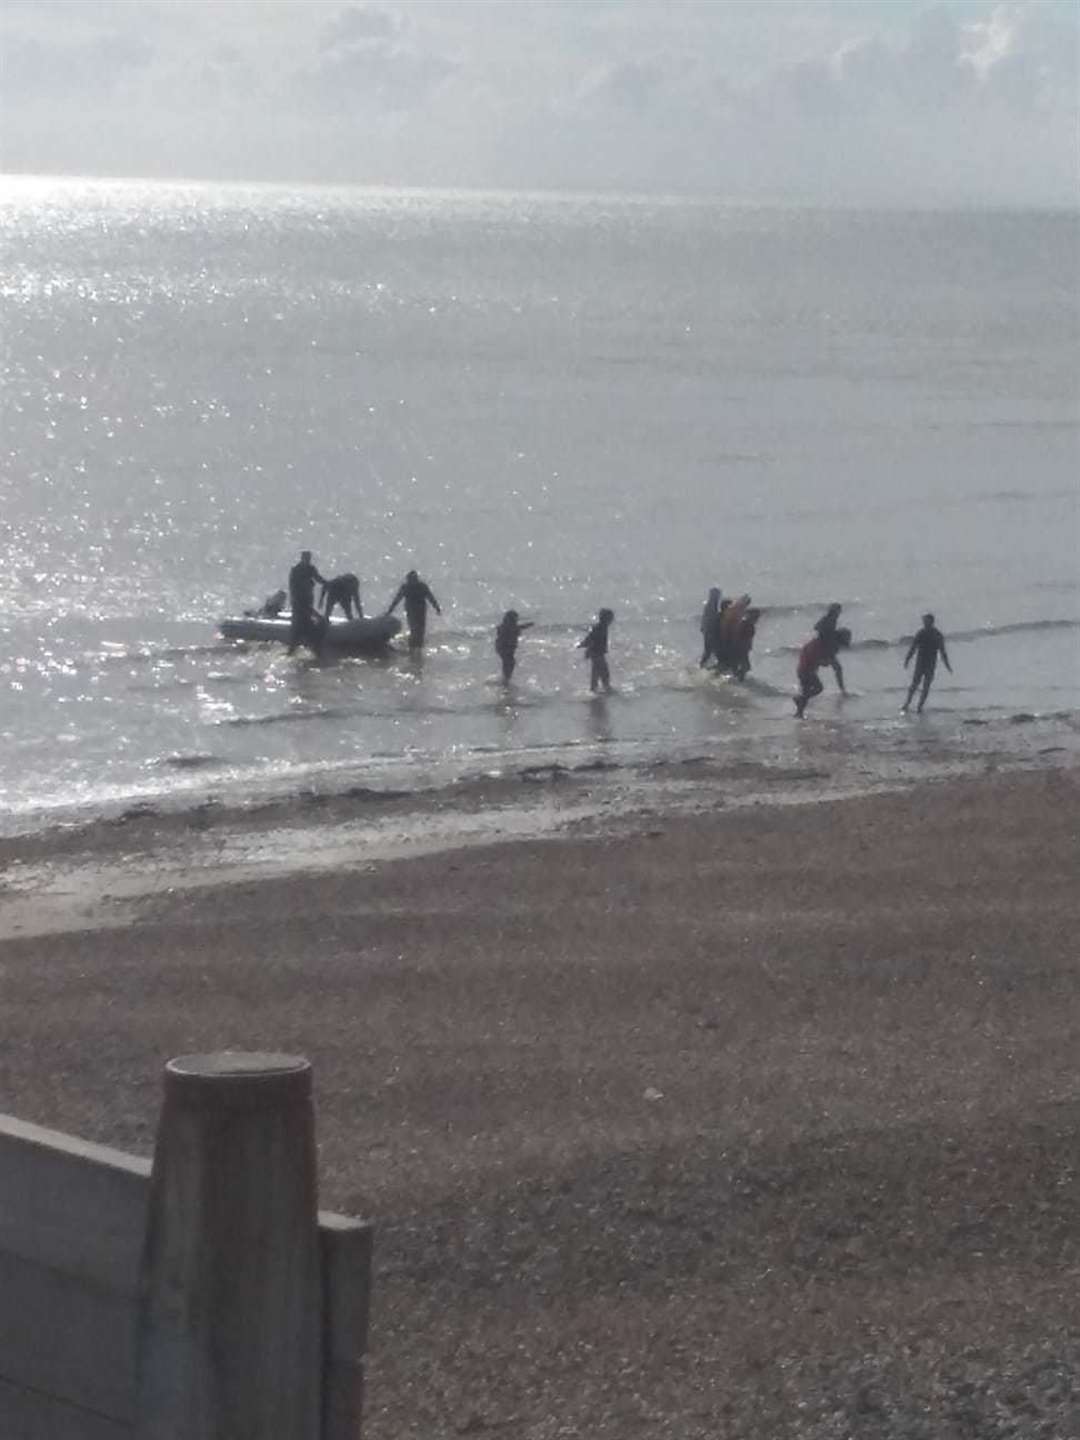 Between 14-16 migrants came ashore at Kingsdown and fled, leaving their small boat in the water. Picture Kristian Thrale